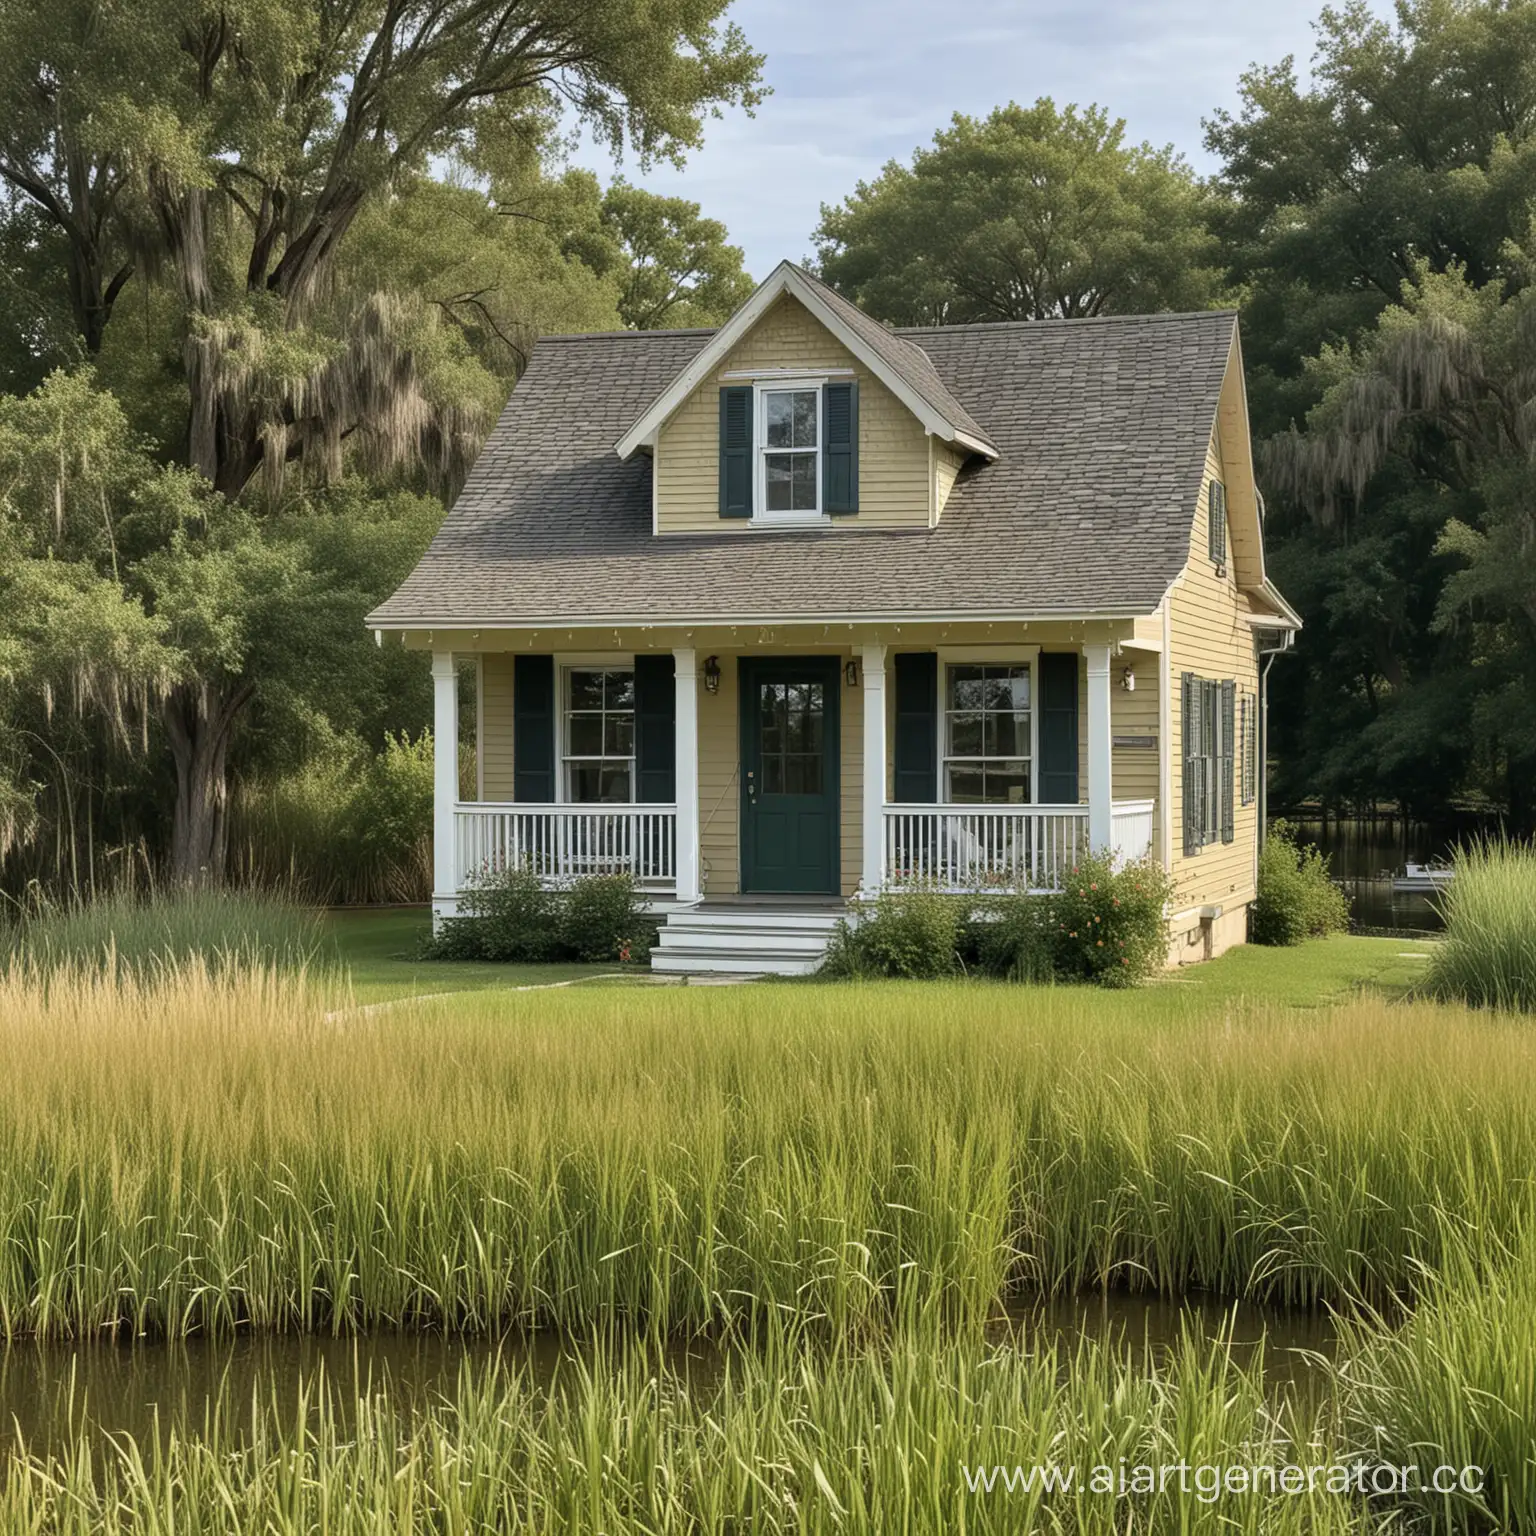 Small 1 bedroom cottage
a lake outside
with window shutters
tall grass in the fron yard
